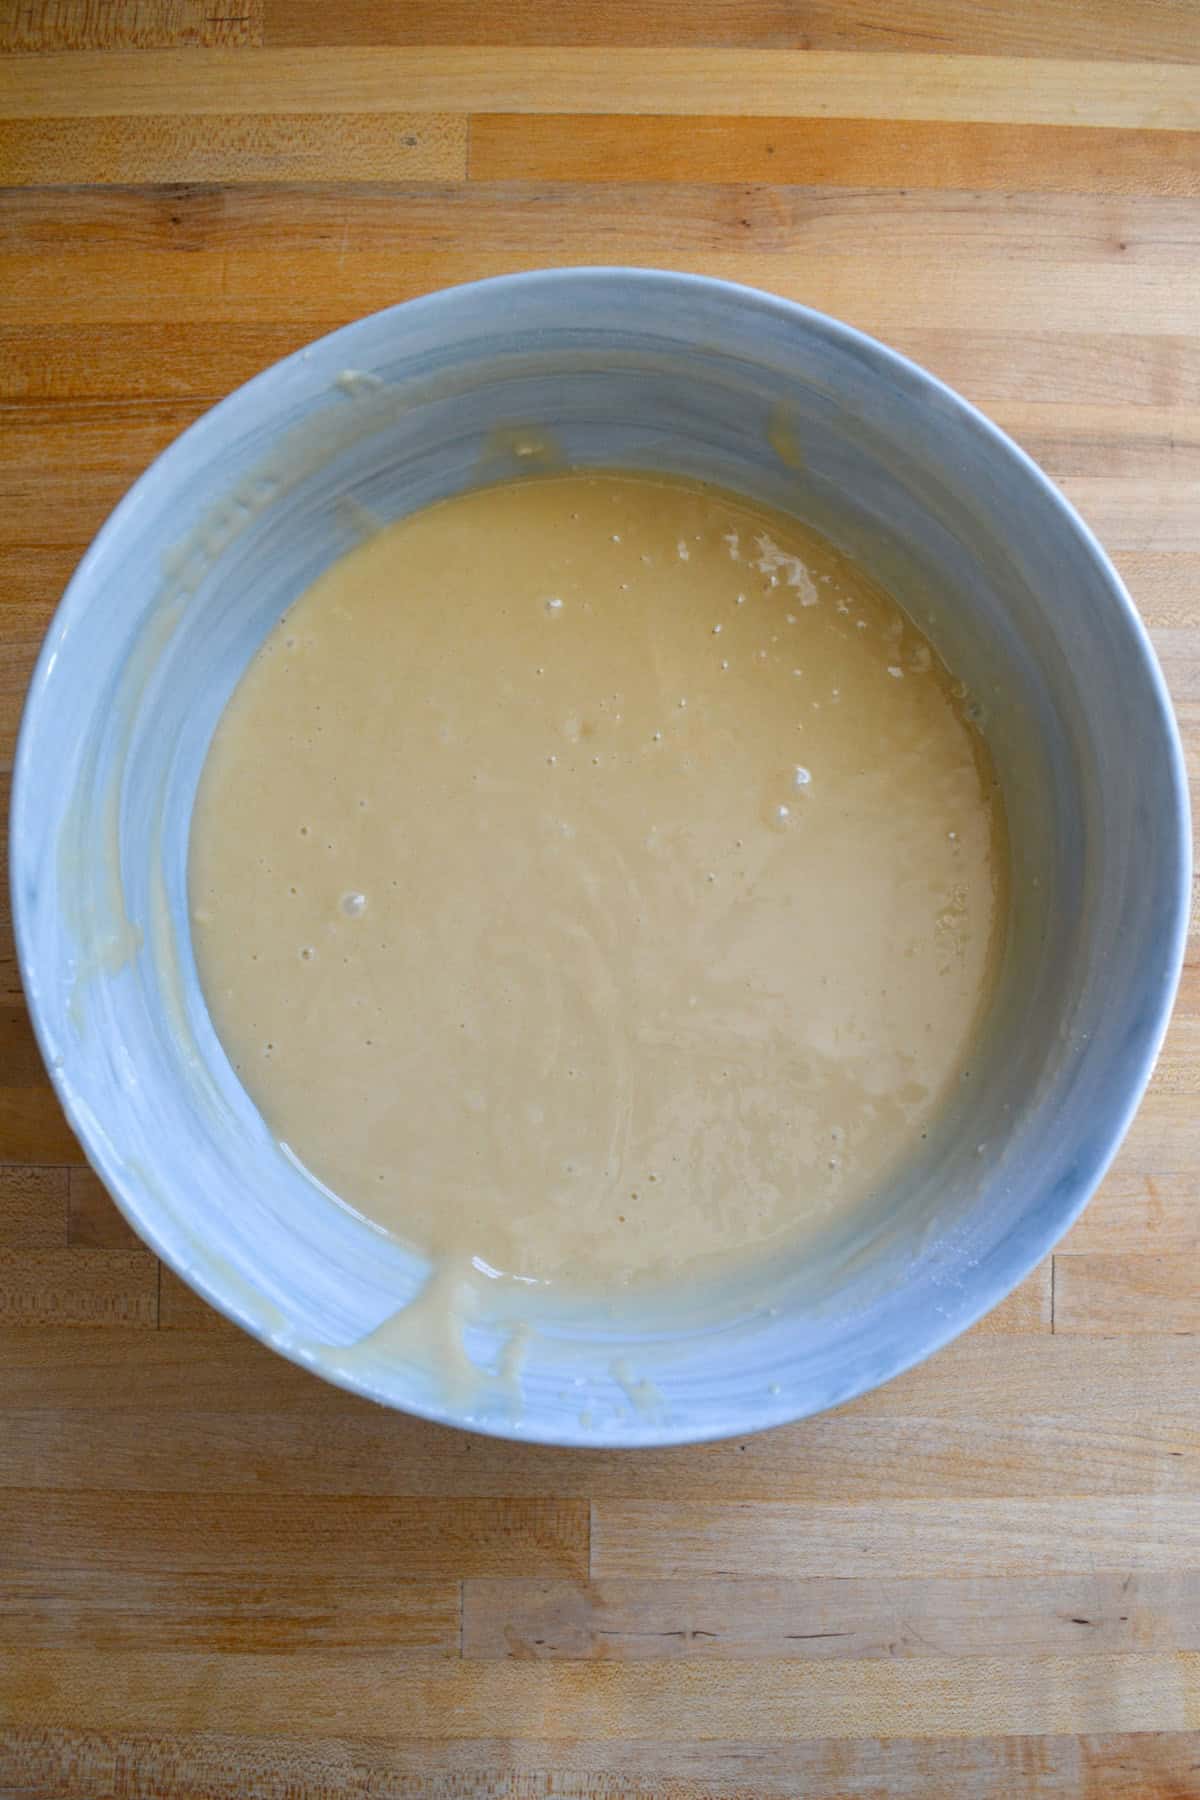 Vegan cake batter in a bowl on a wooden surface.